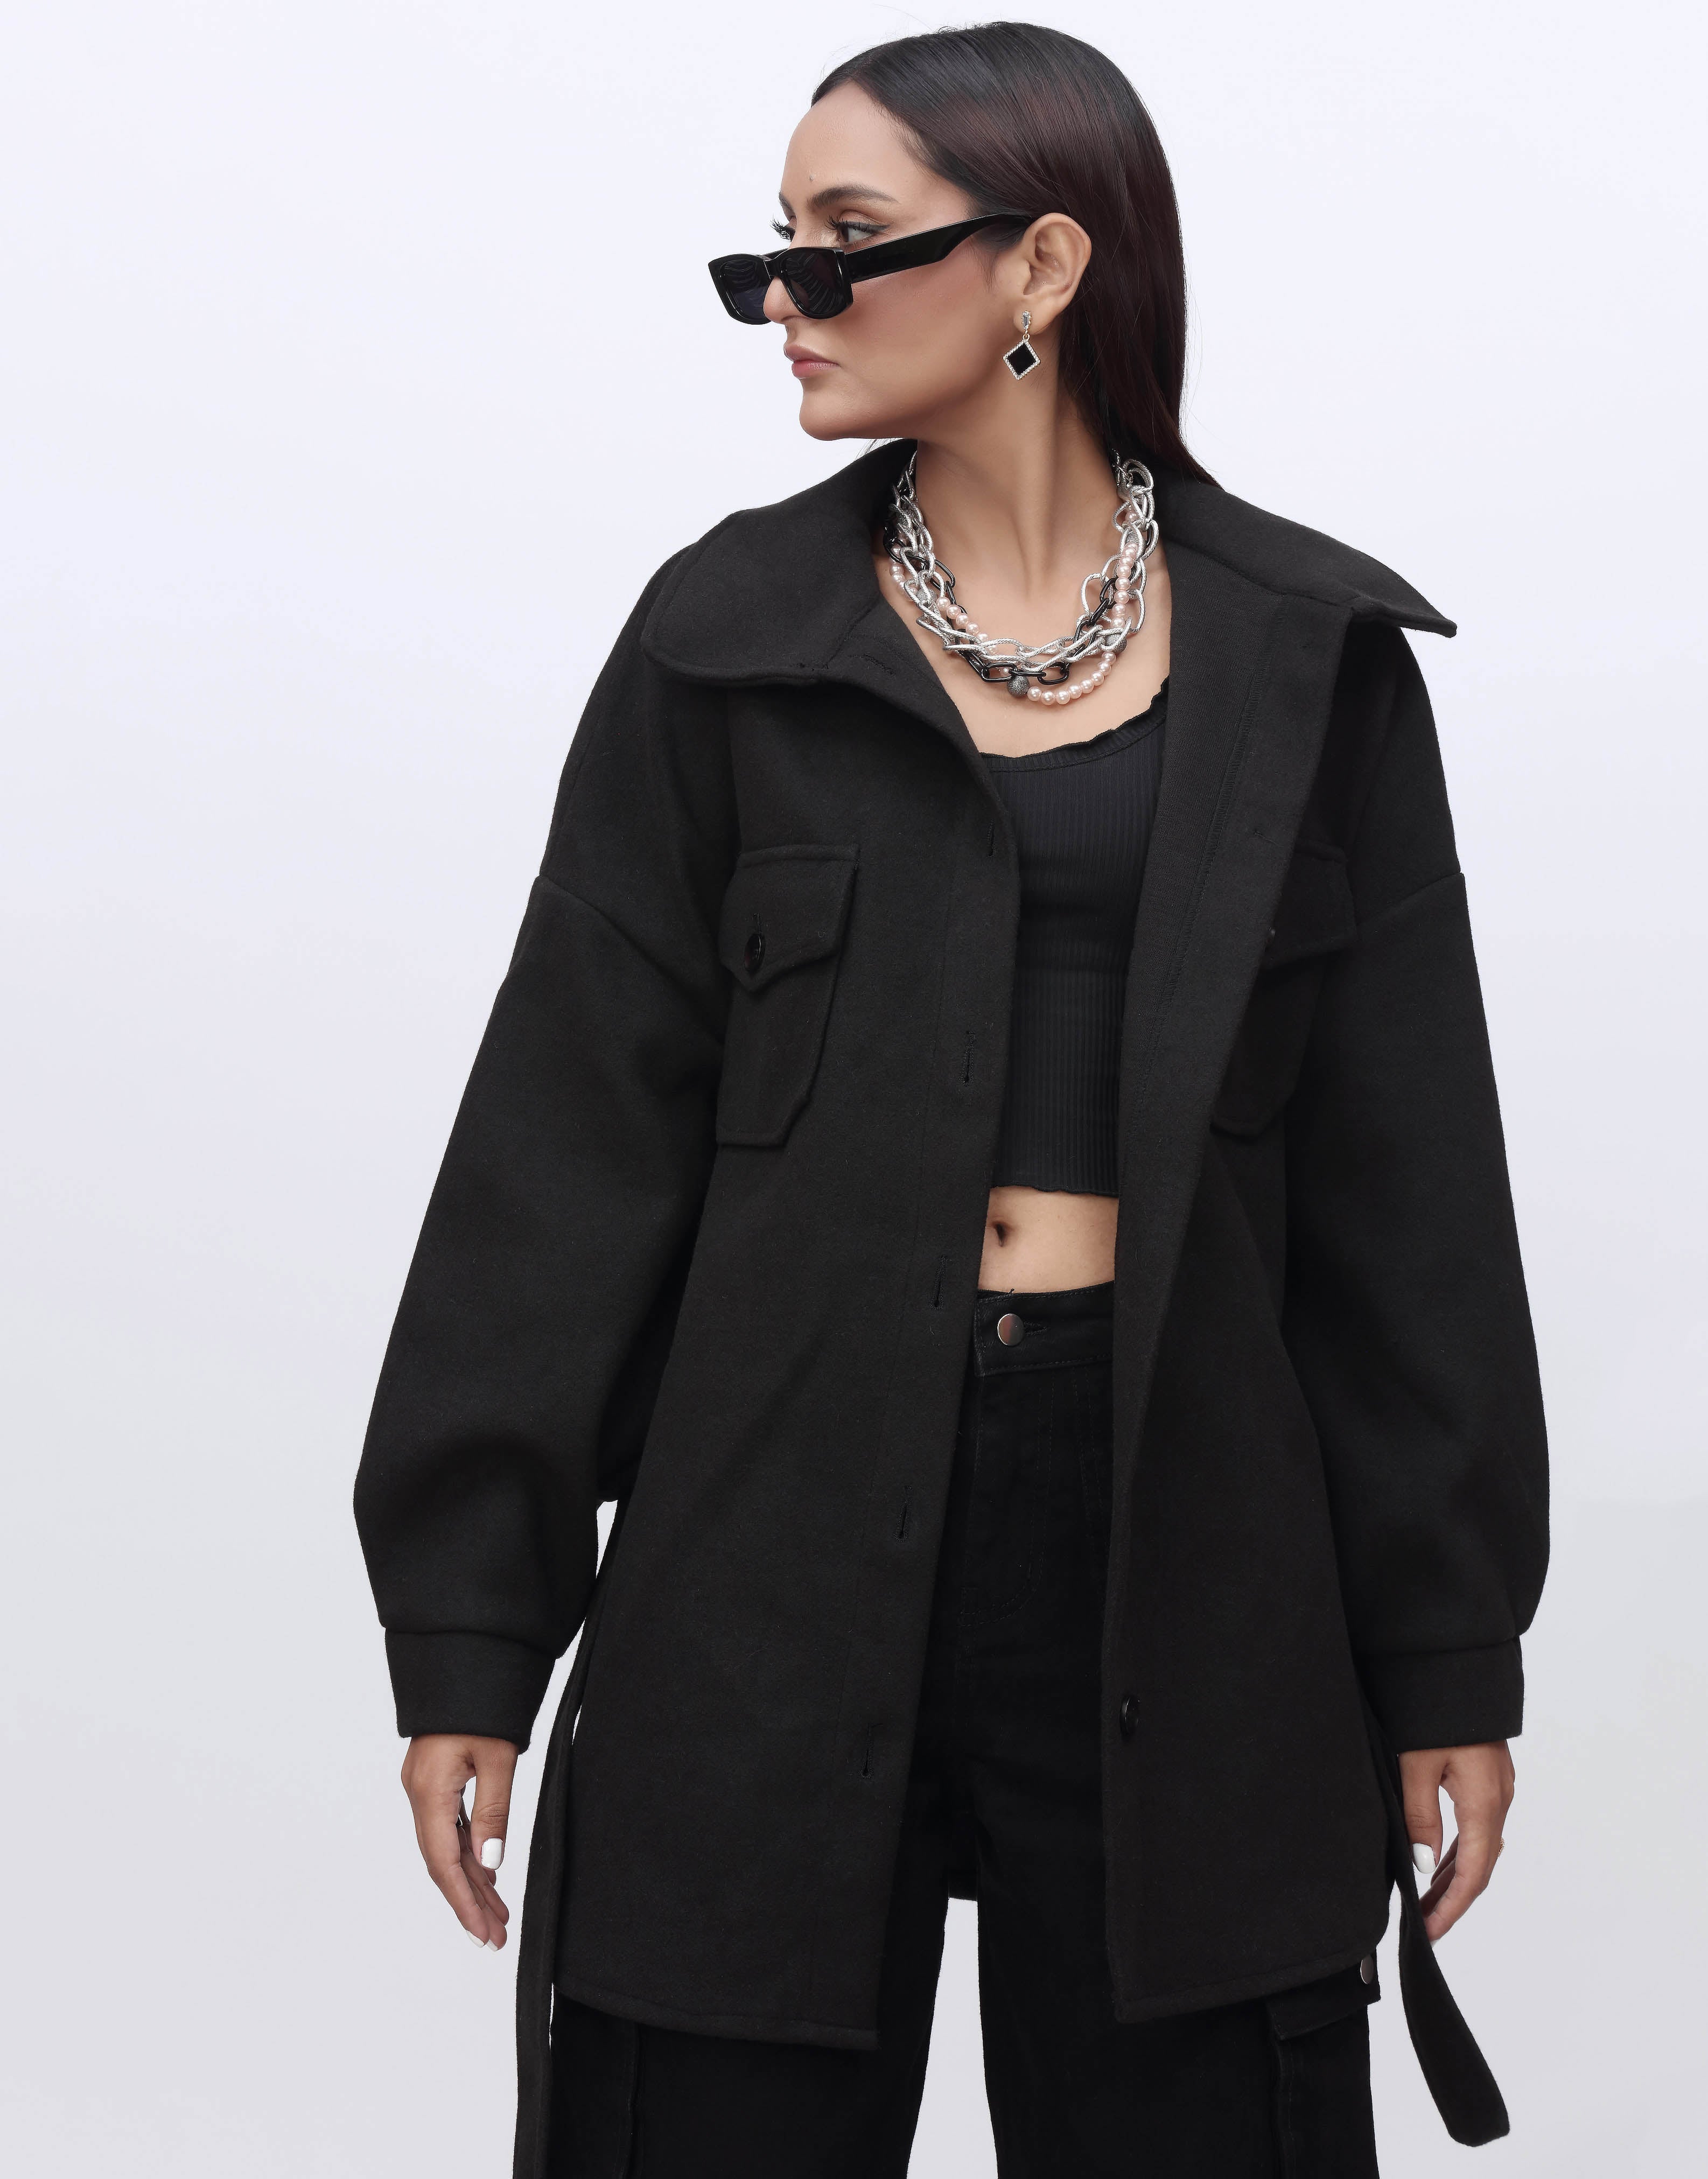 Trench Coat-Black (Without Belt)